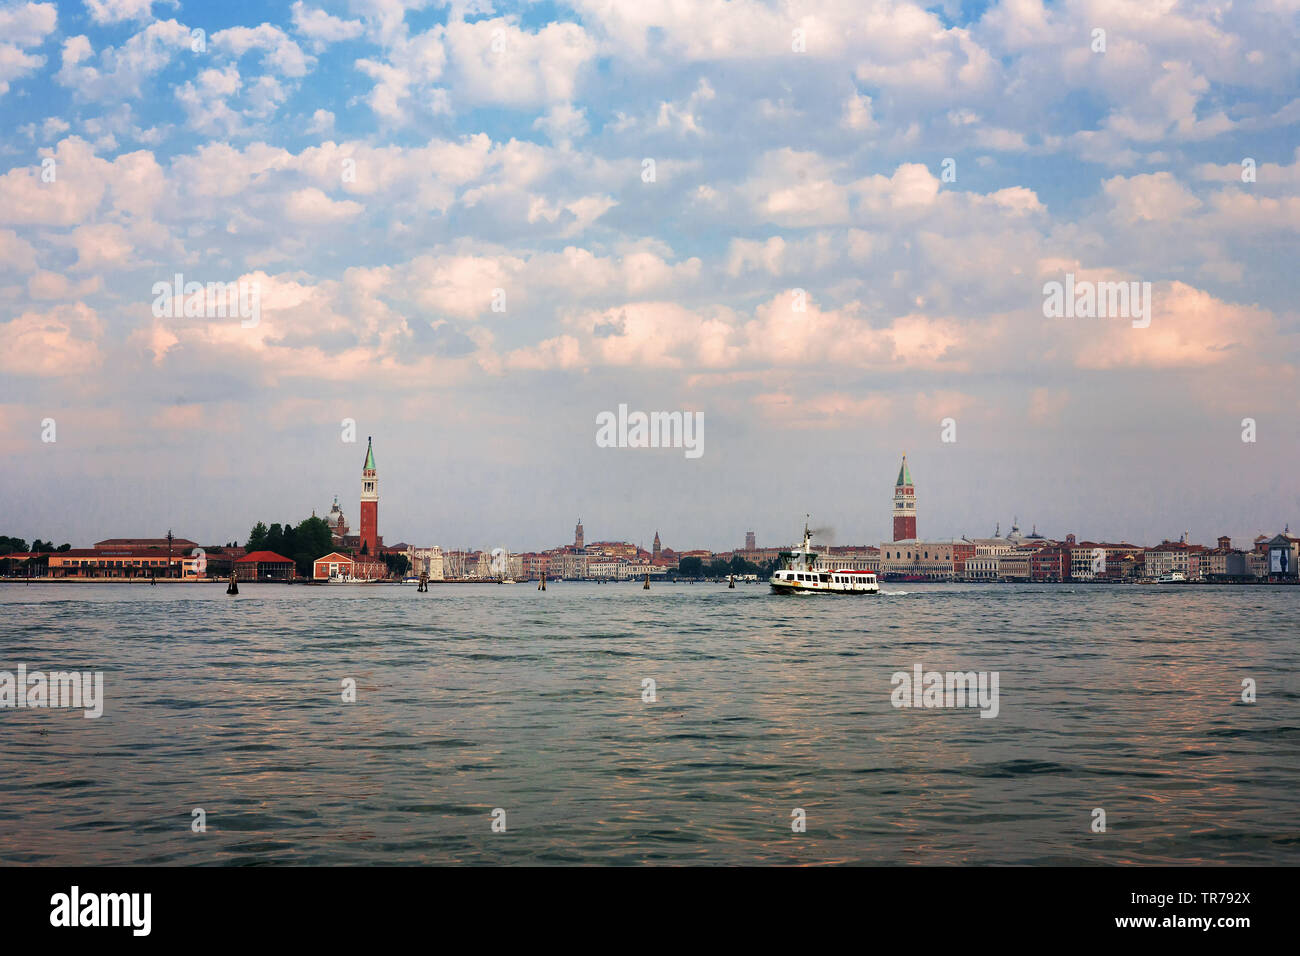 Approaching Venice by sea: the Canale di San Marco, Venice, Italy Stock Photo